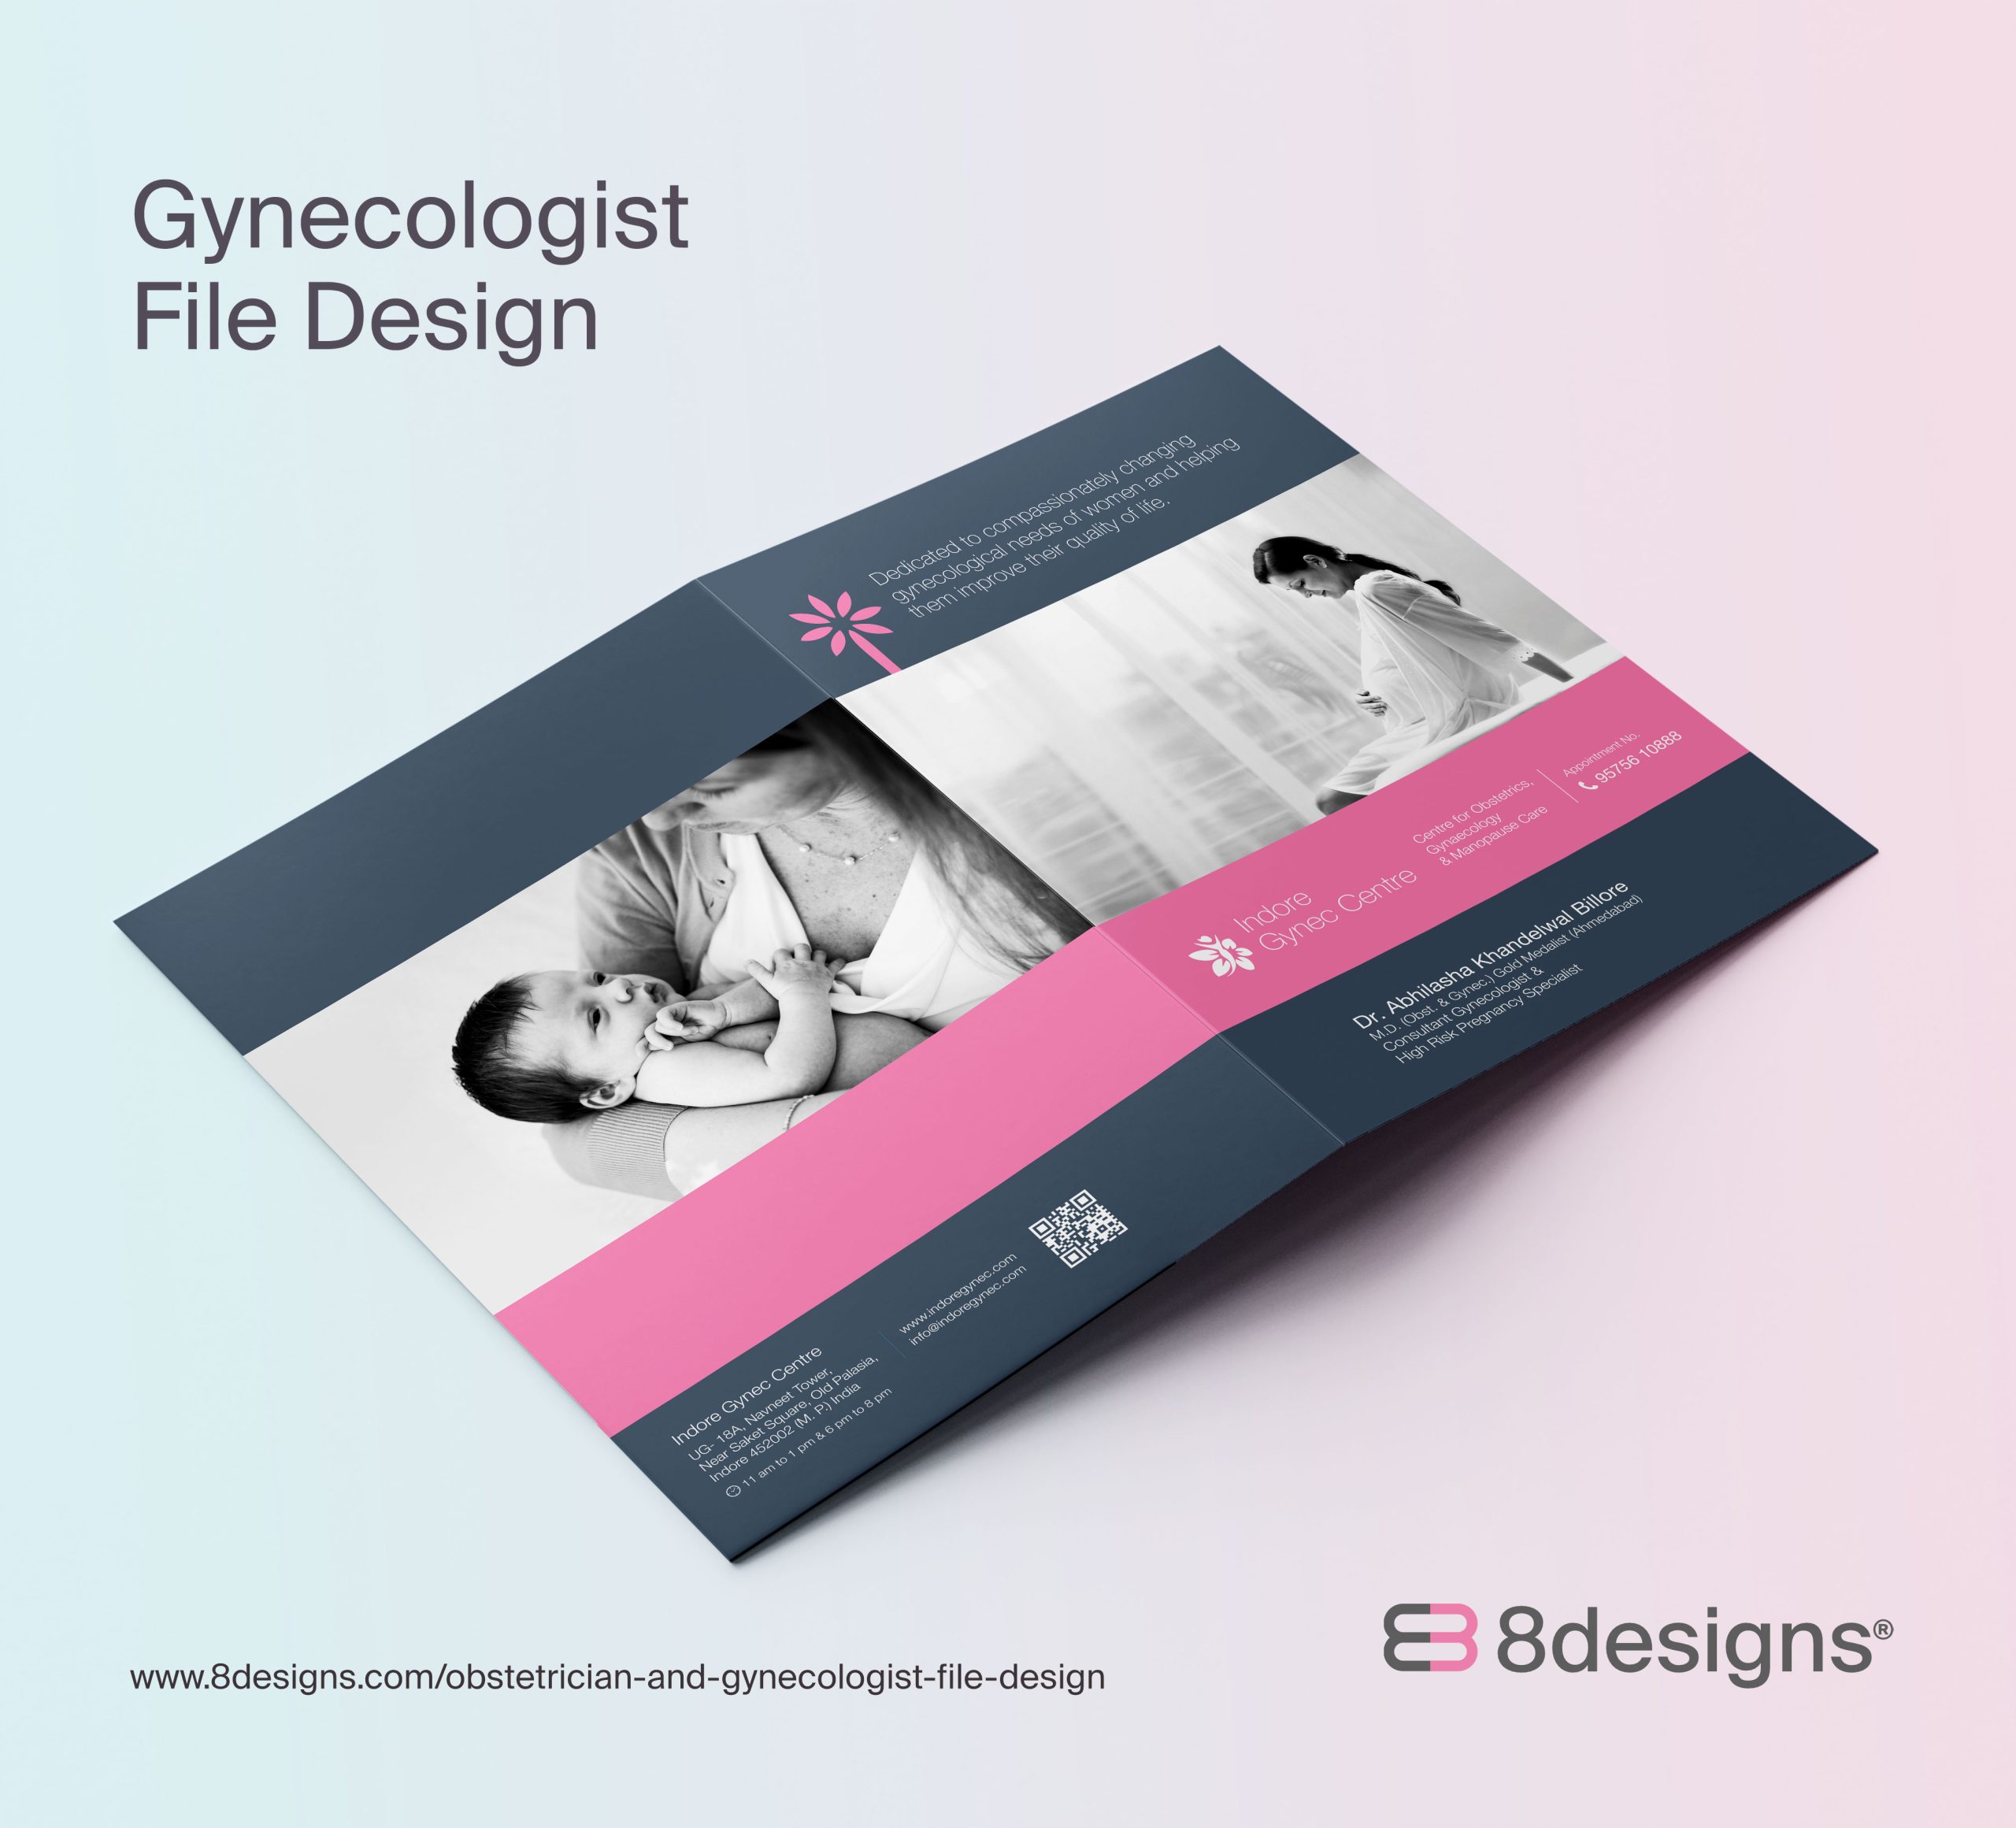 Clinic File Design for Gynecologists and Obstetricians 